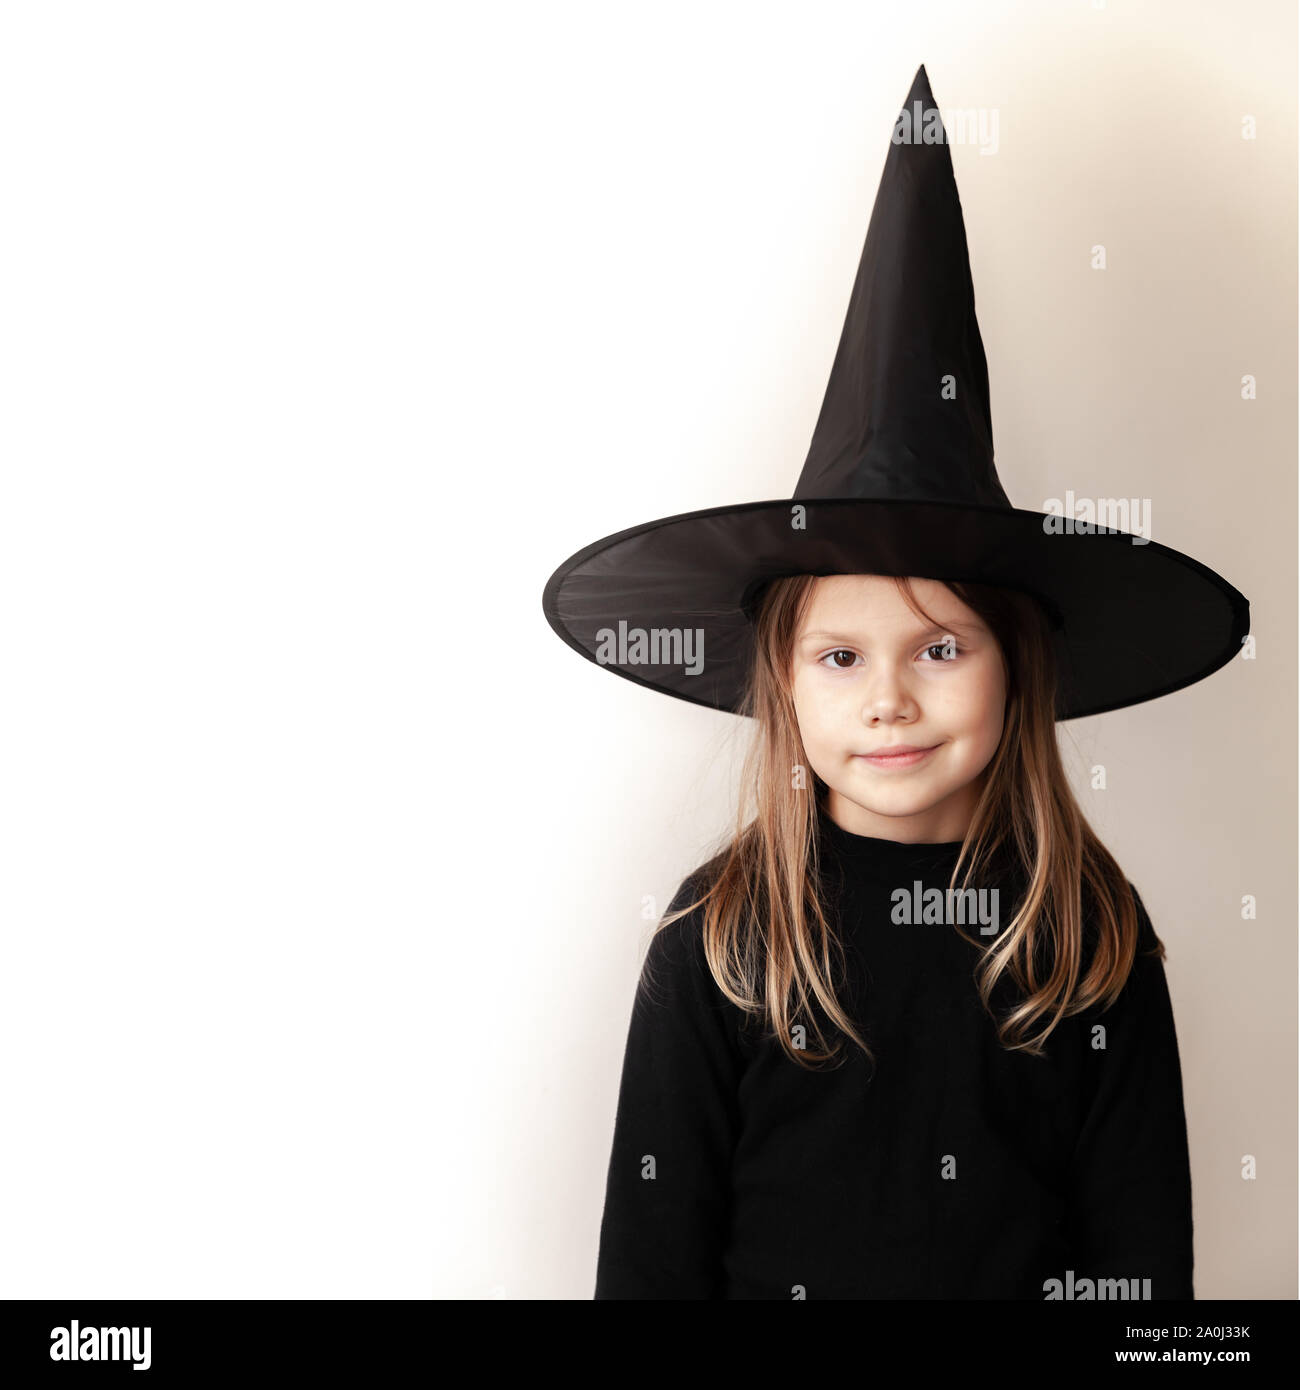 Little blond Caucasian girl in black witch costume smiles over white wall, close-up studio portrait with copy space area on a left side Stock Photo